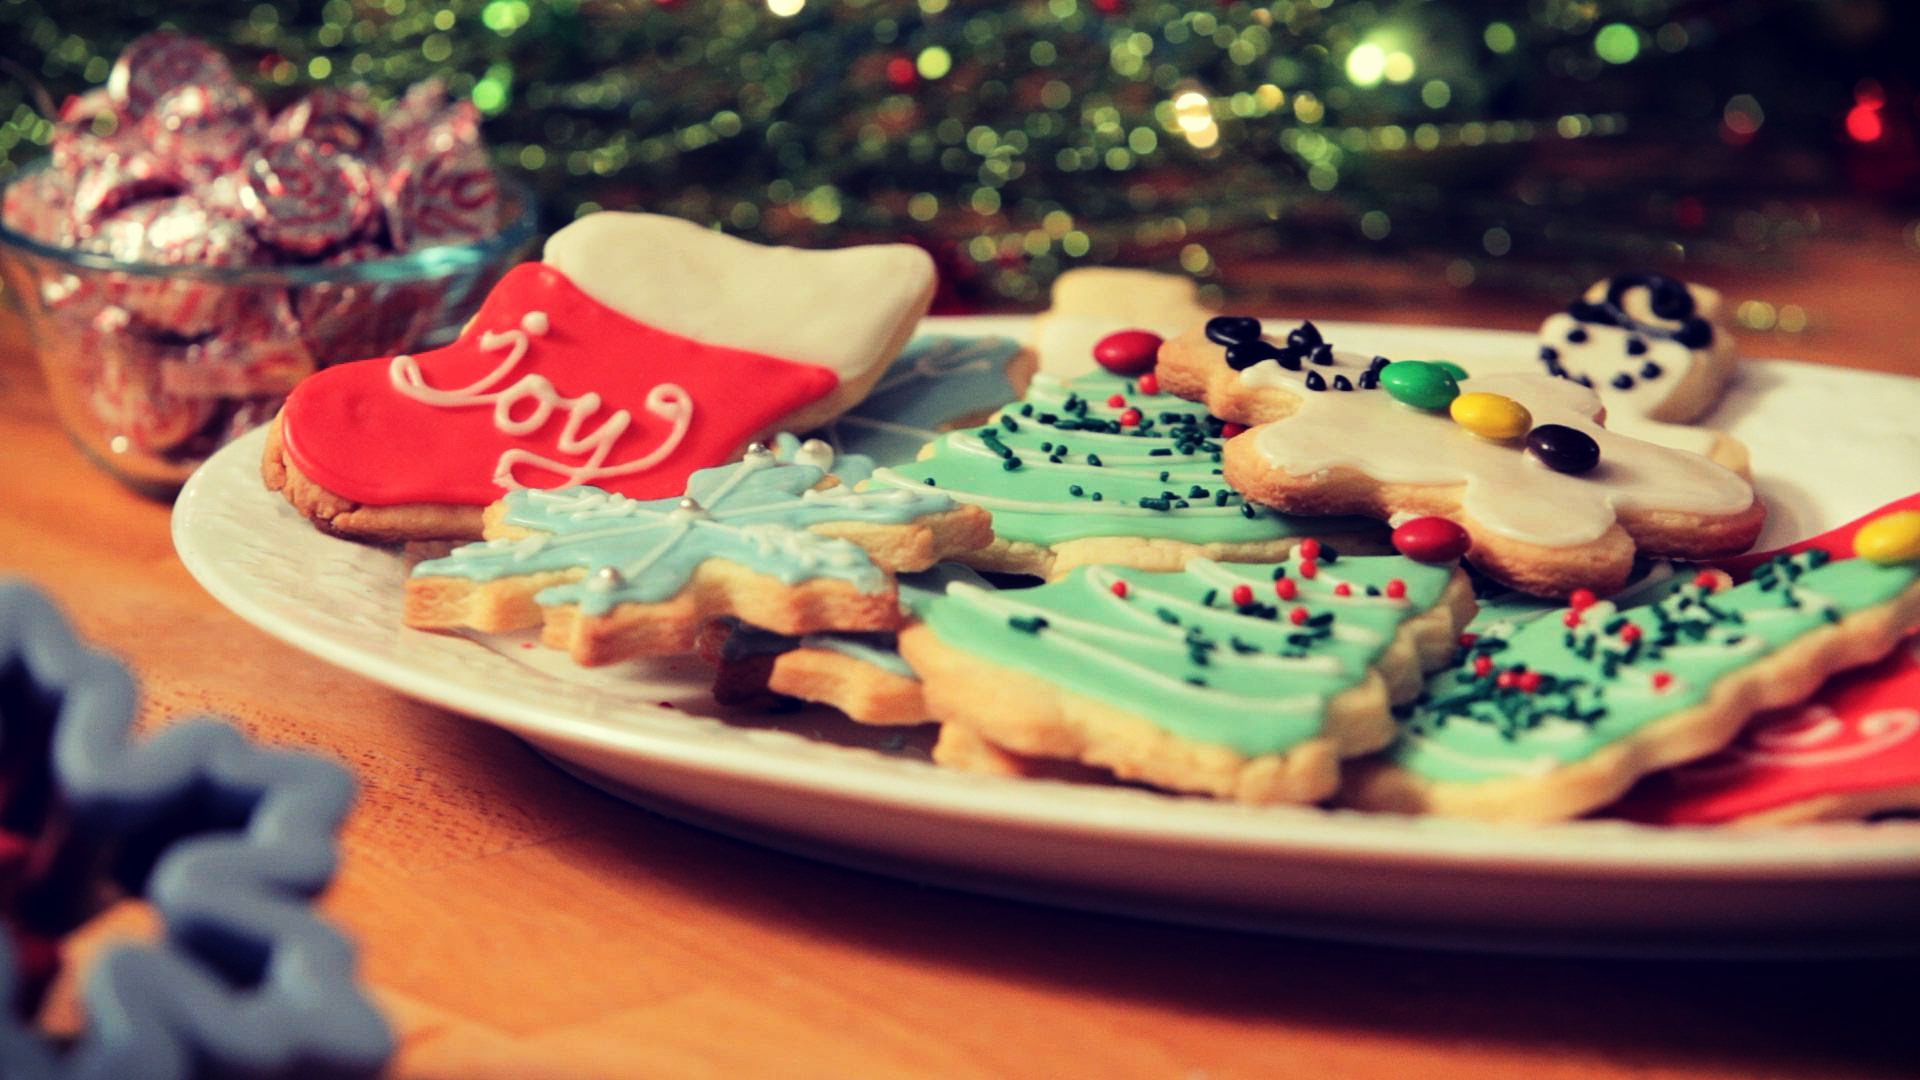 Awesome Christmas Cookies Wallpaper 40523